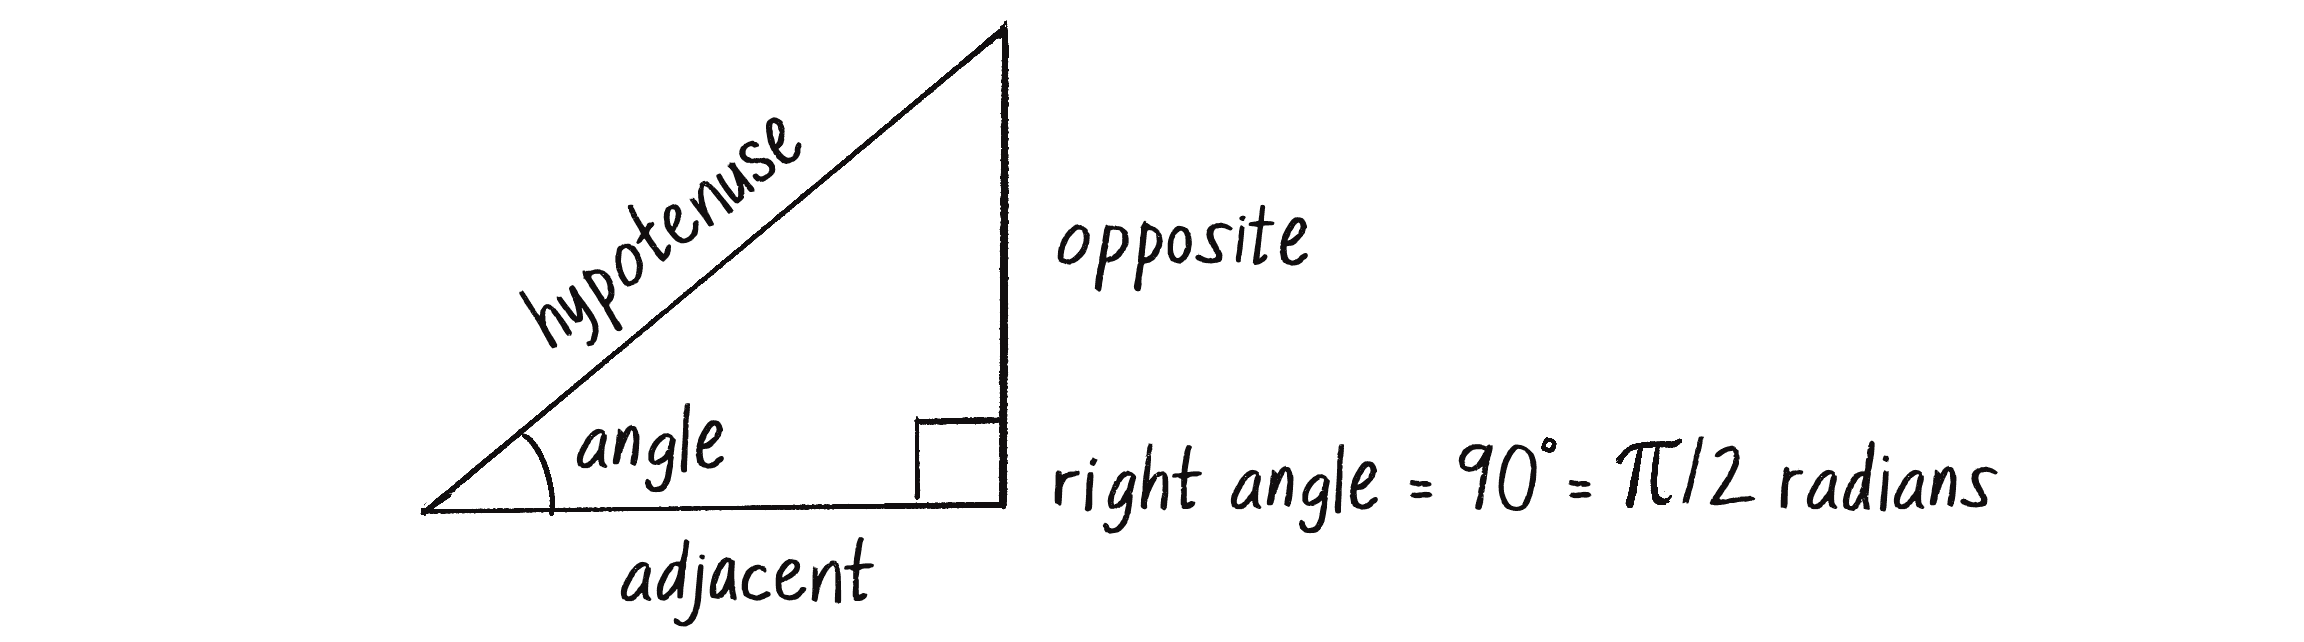 Figure 3.4: A right triangle showing the sides as adjacent, opposite, and hypotenuse